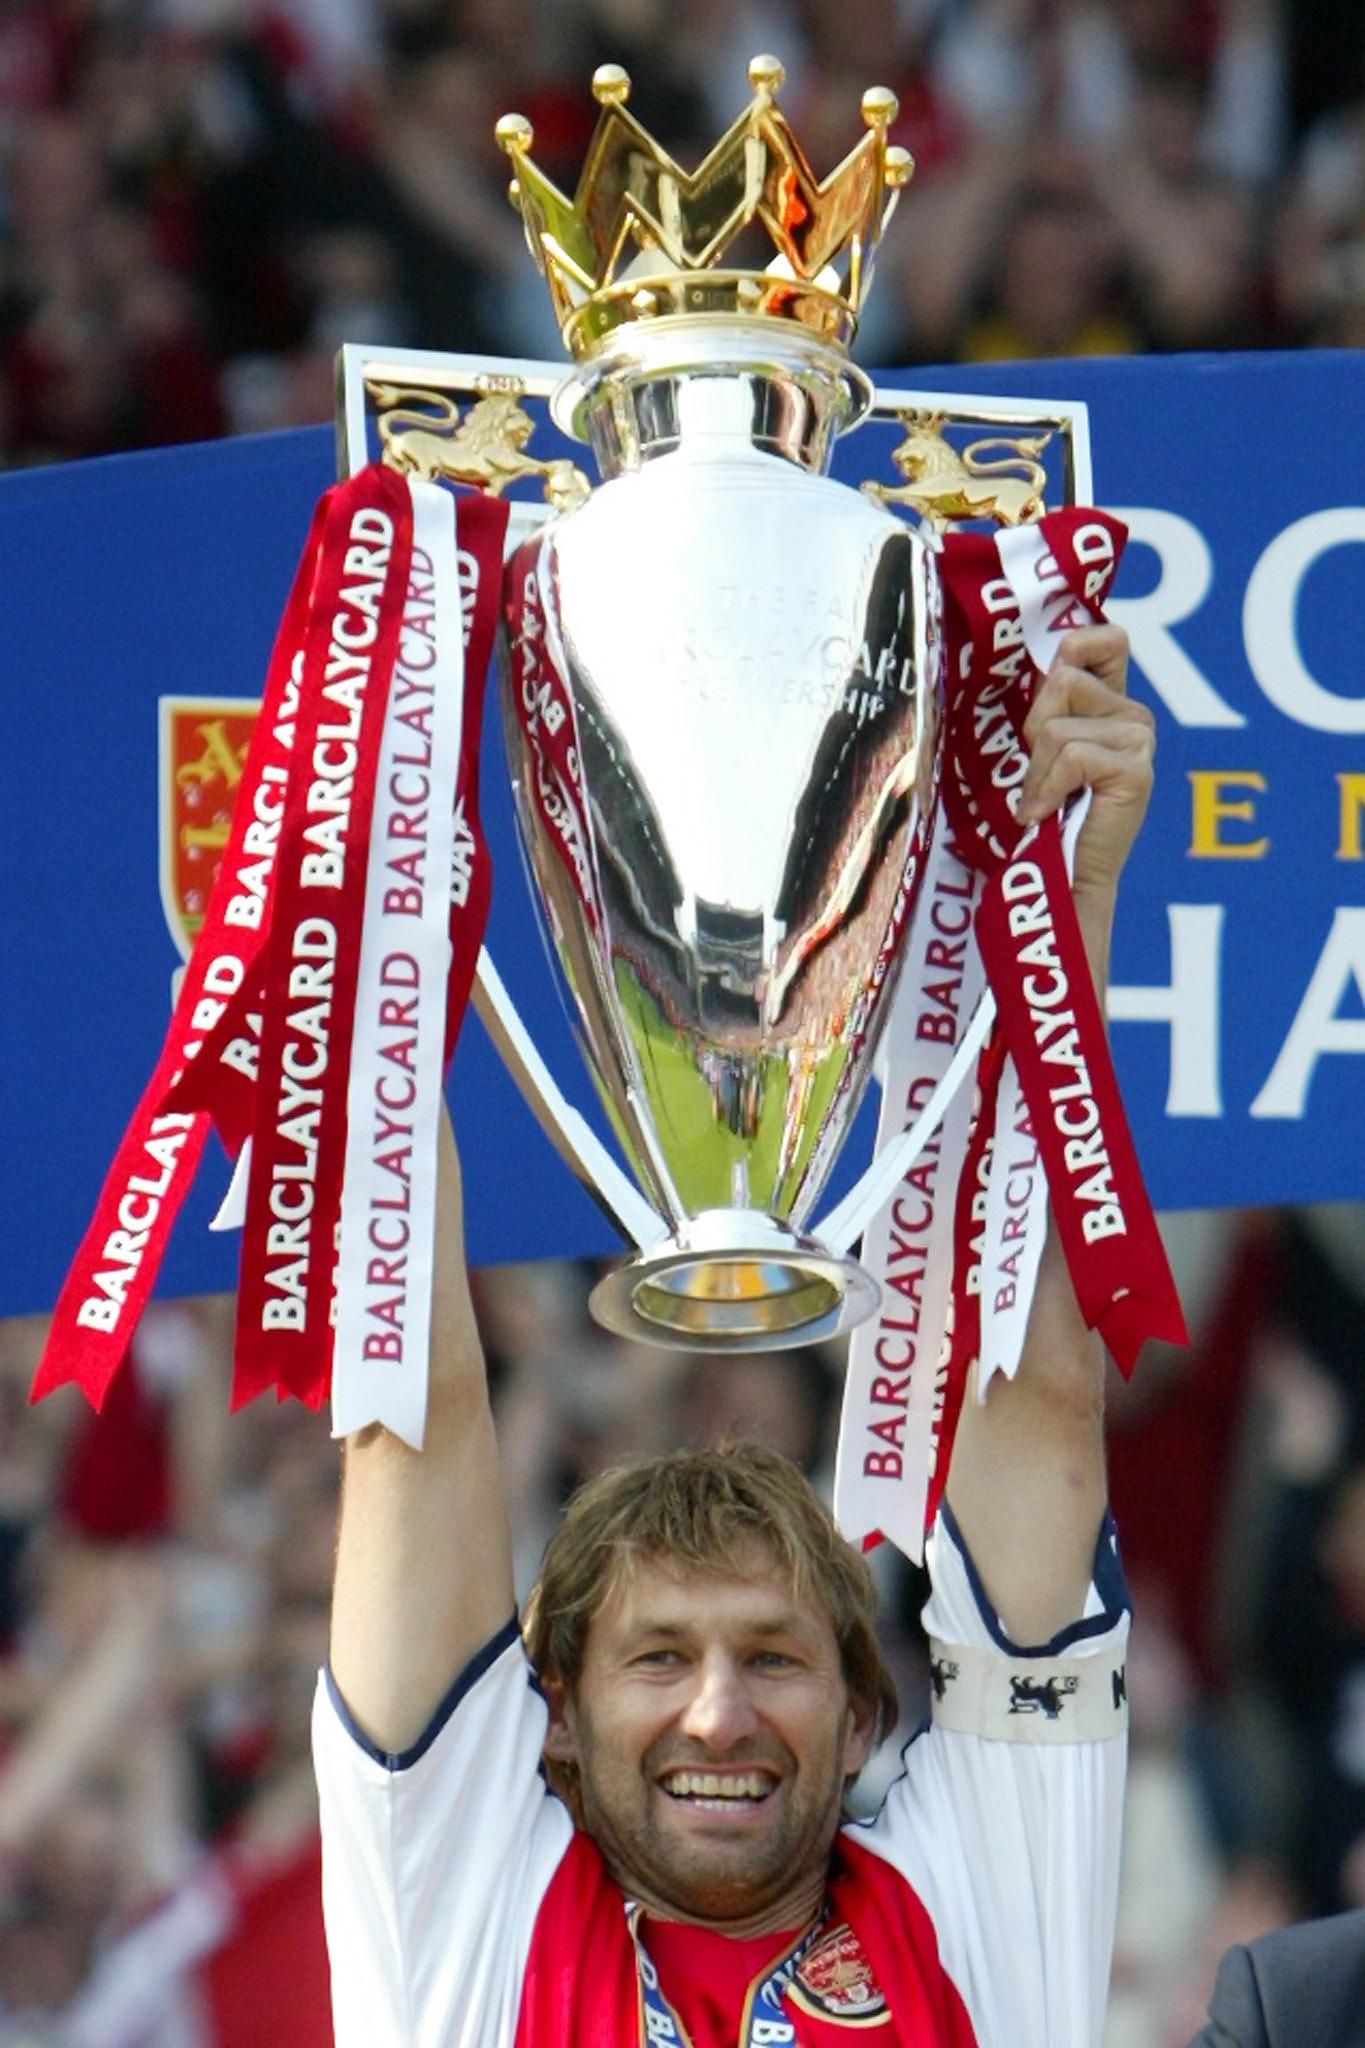 Happy 49th birthday to Arsenal icon Tony Adams, winner of the English domestic double on 2 occasions. One-club man. 